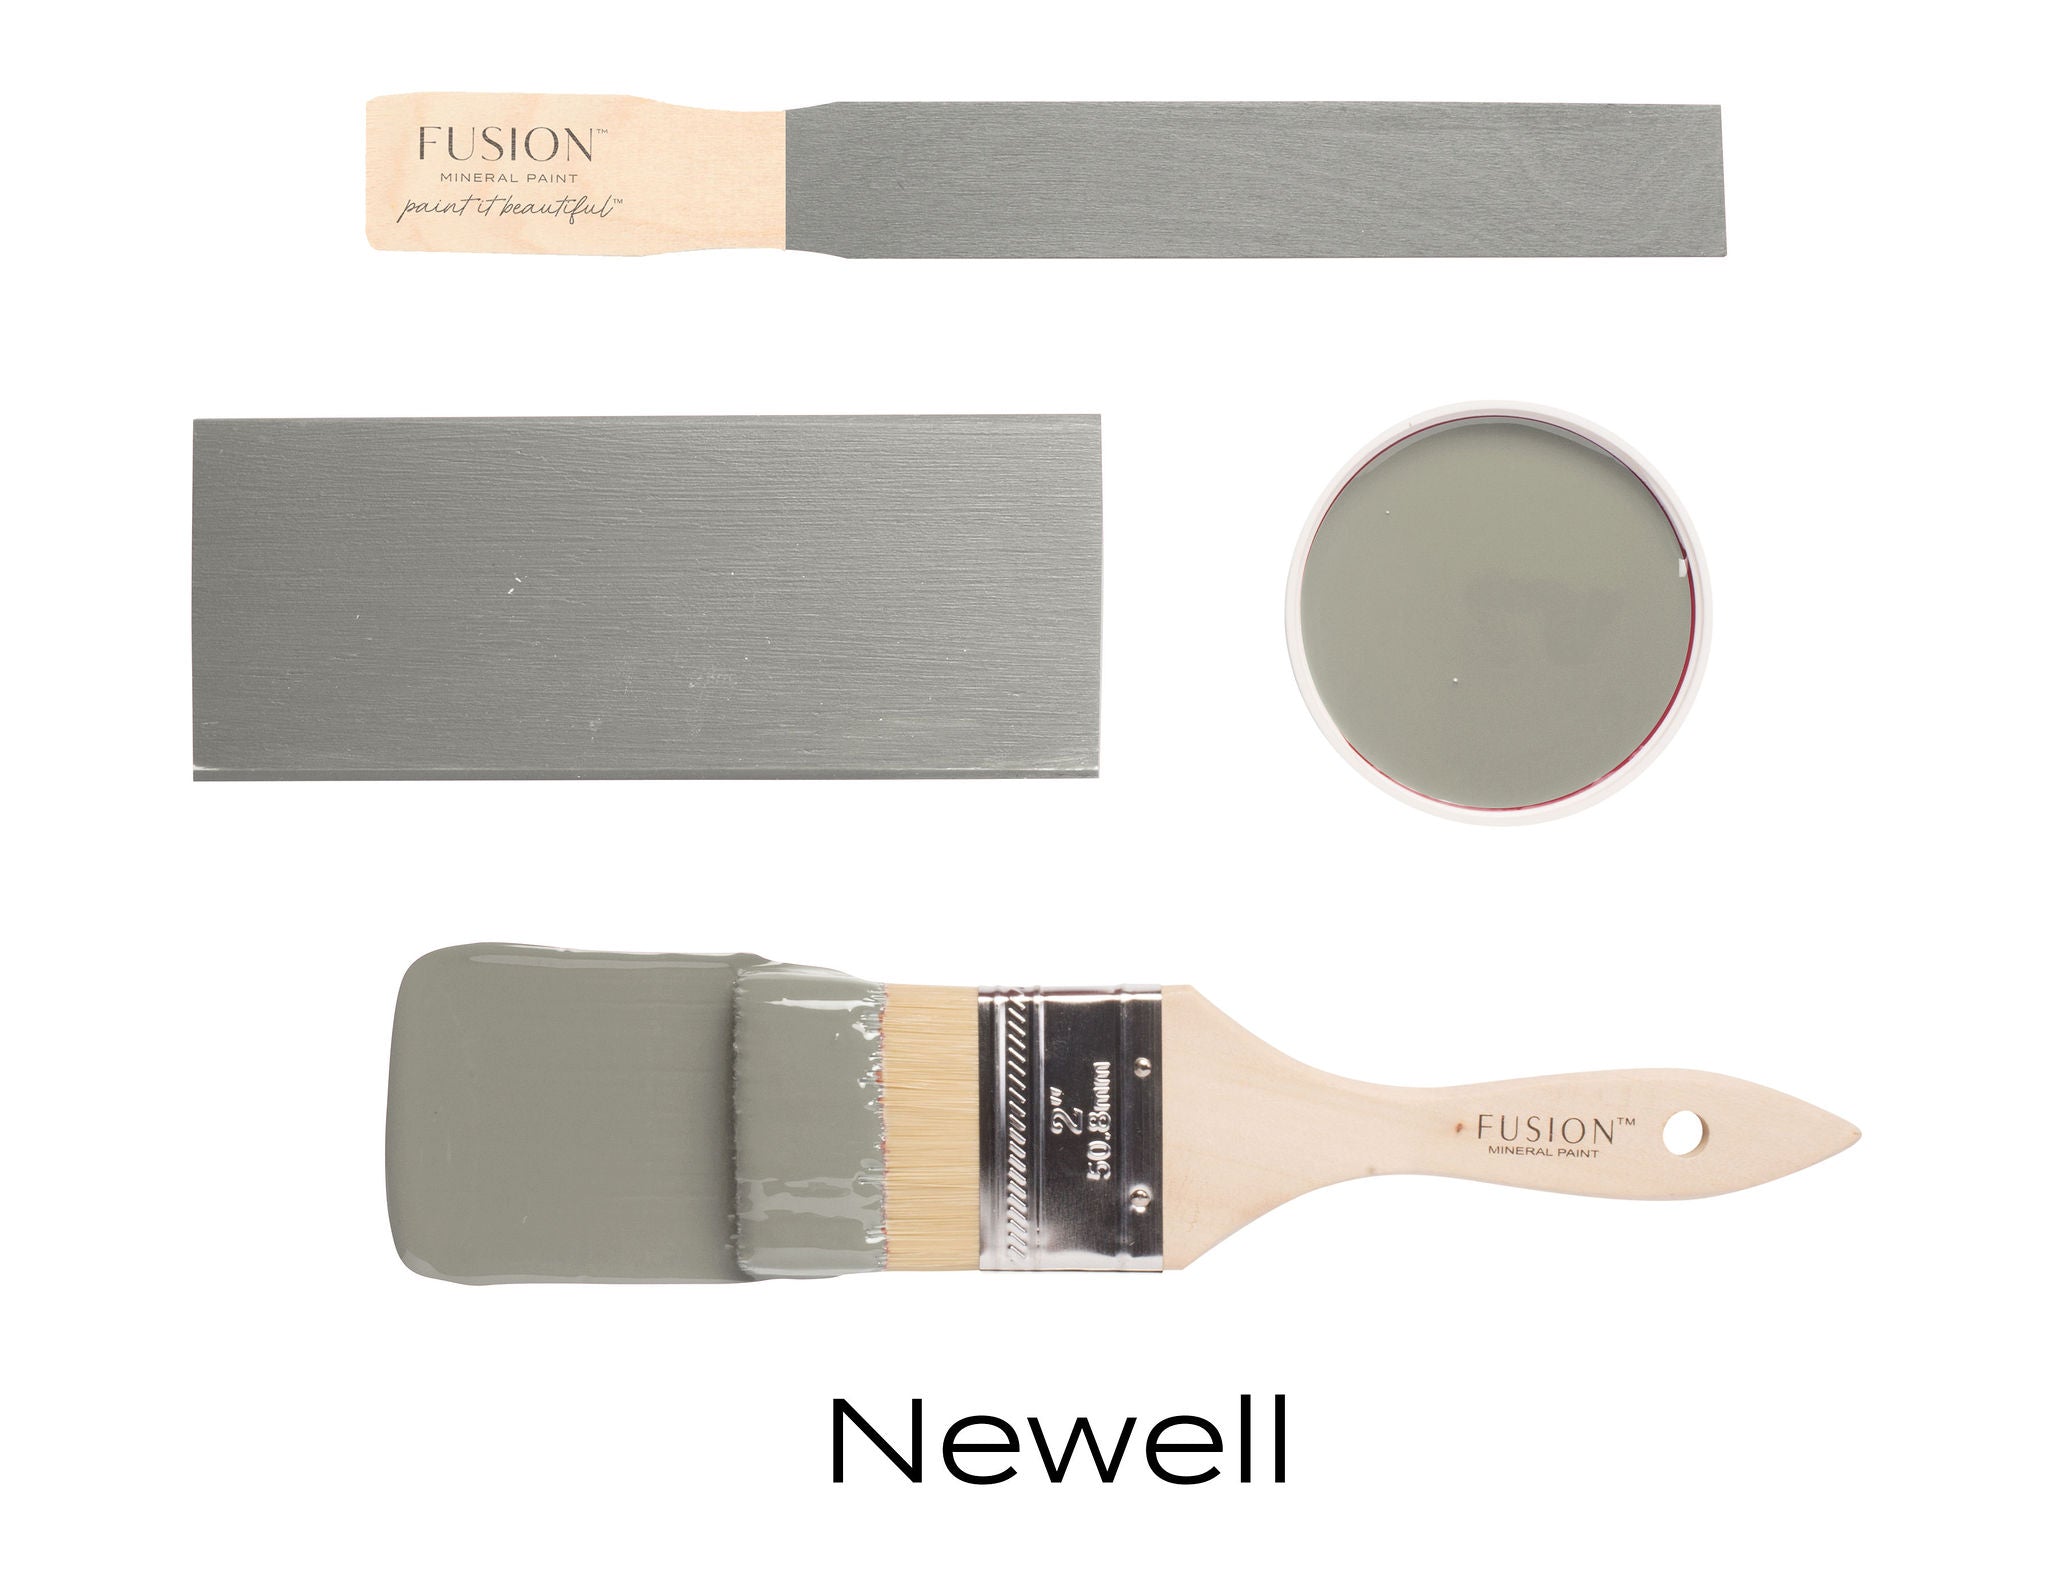 Fusion Mineral Paint Newell, Fusion Paint Newell